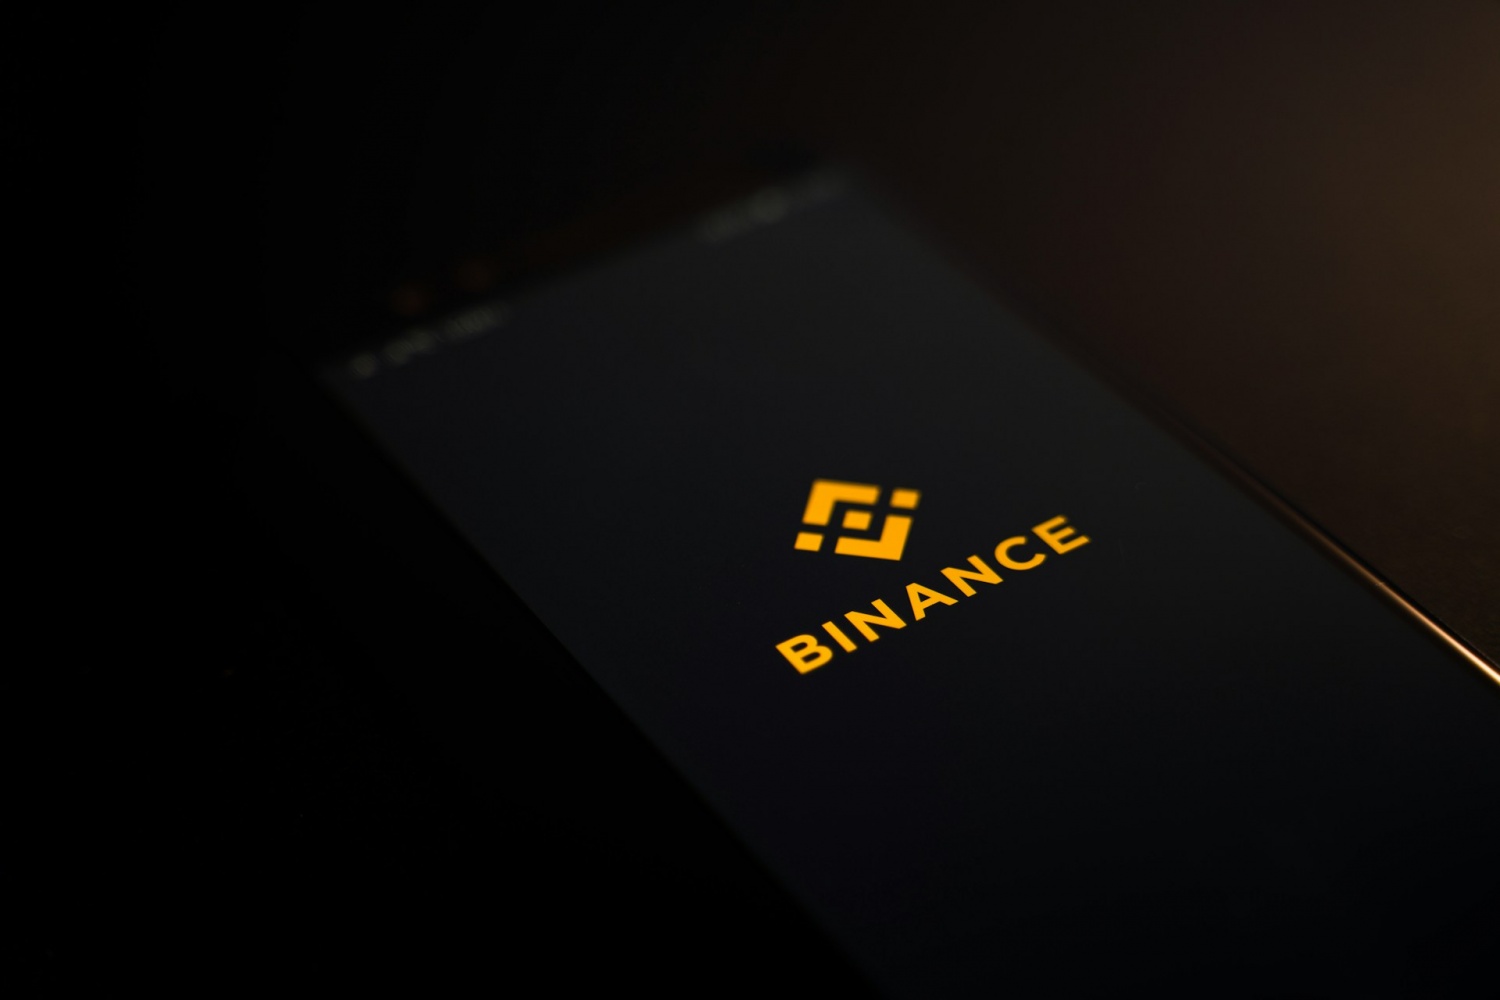 Philippines' SEC Requests Binance to be Removed From App Stores, Citing Security Risk For Filipino Investors